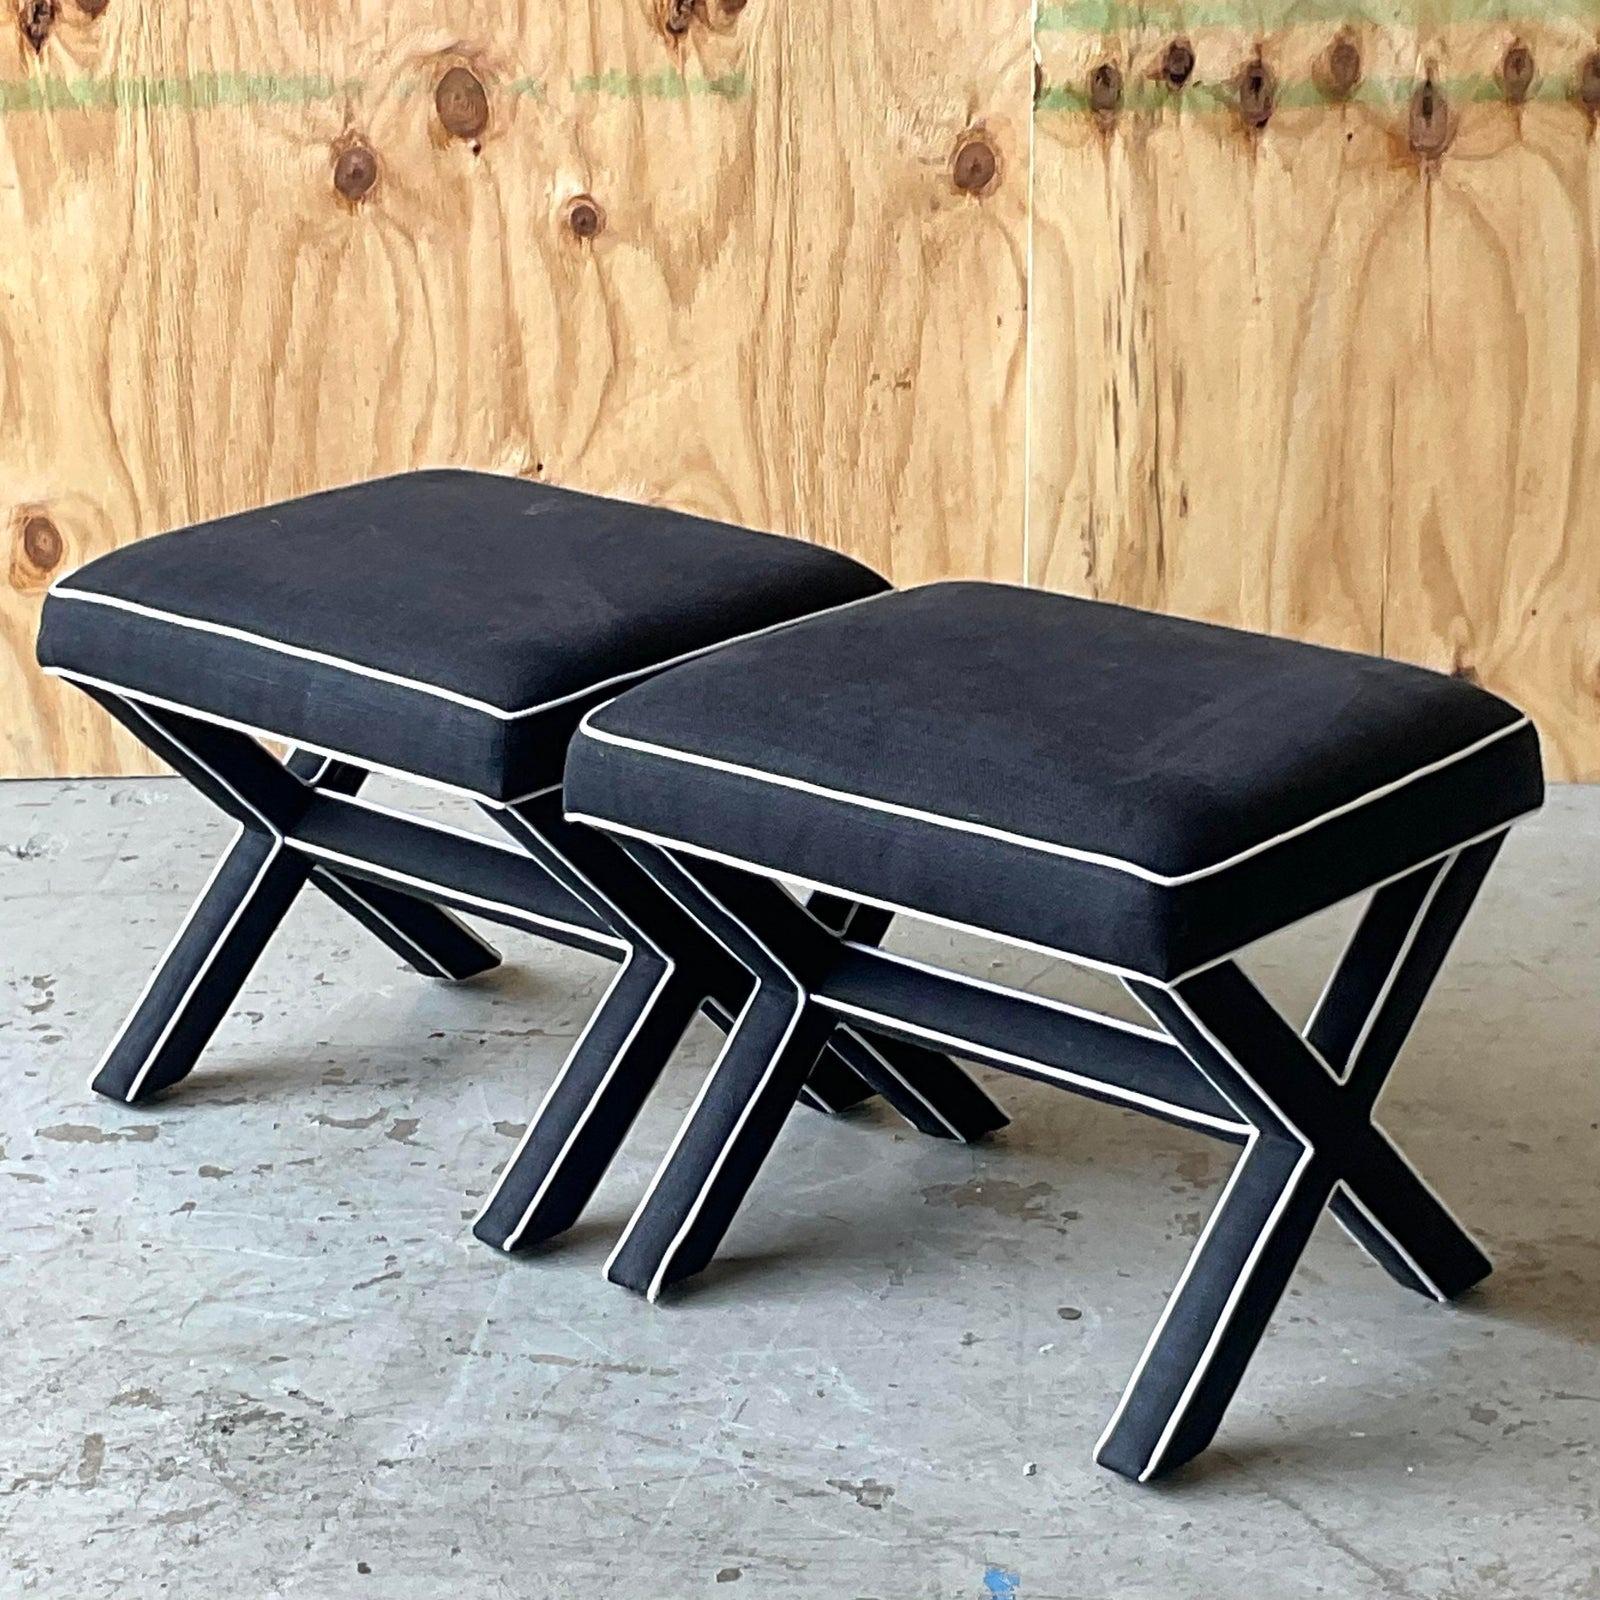 North American Vintage Regency Tipped X Benches - a Pair For Sale